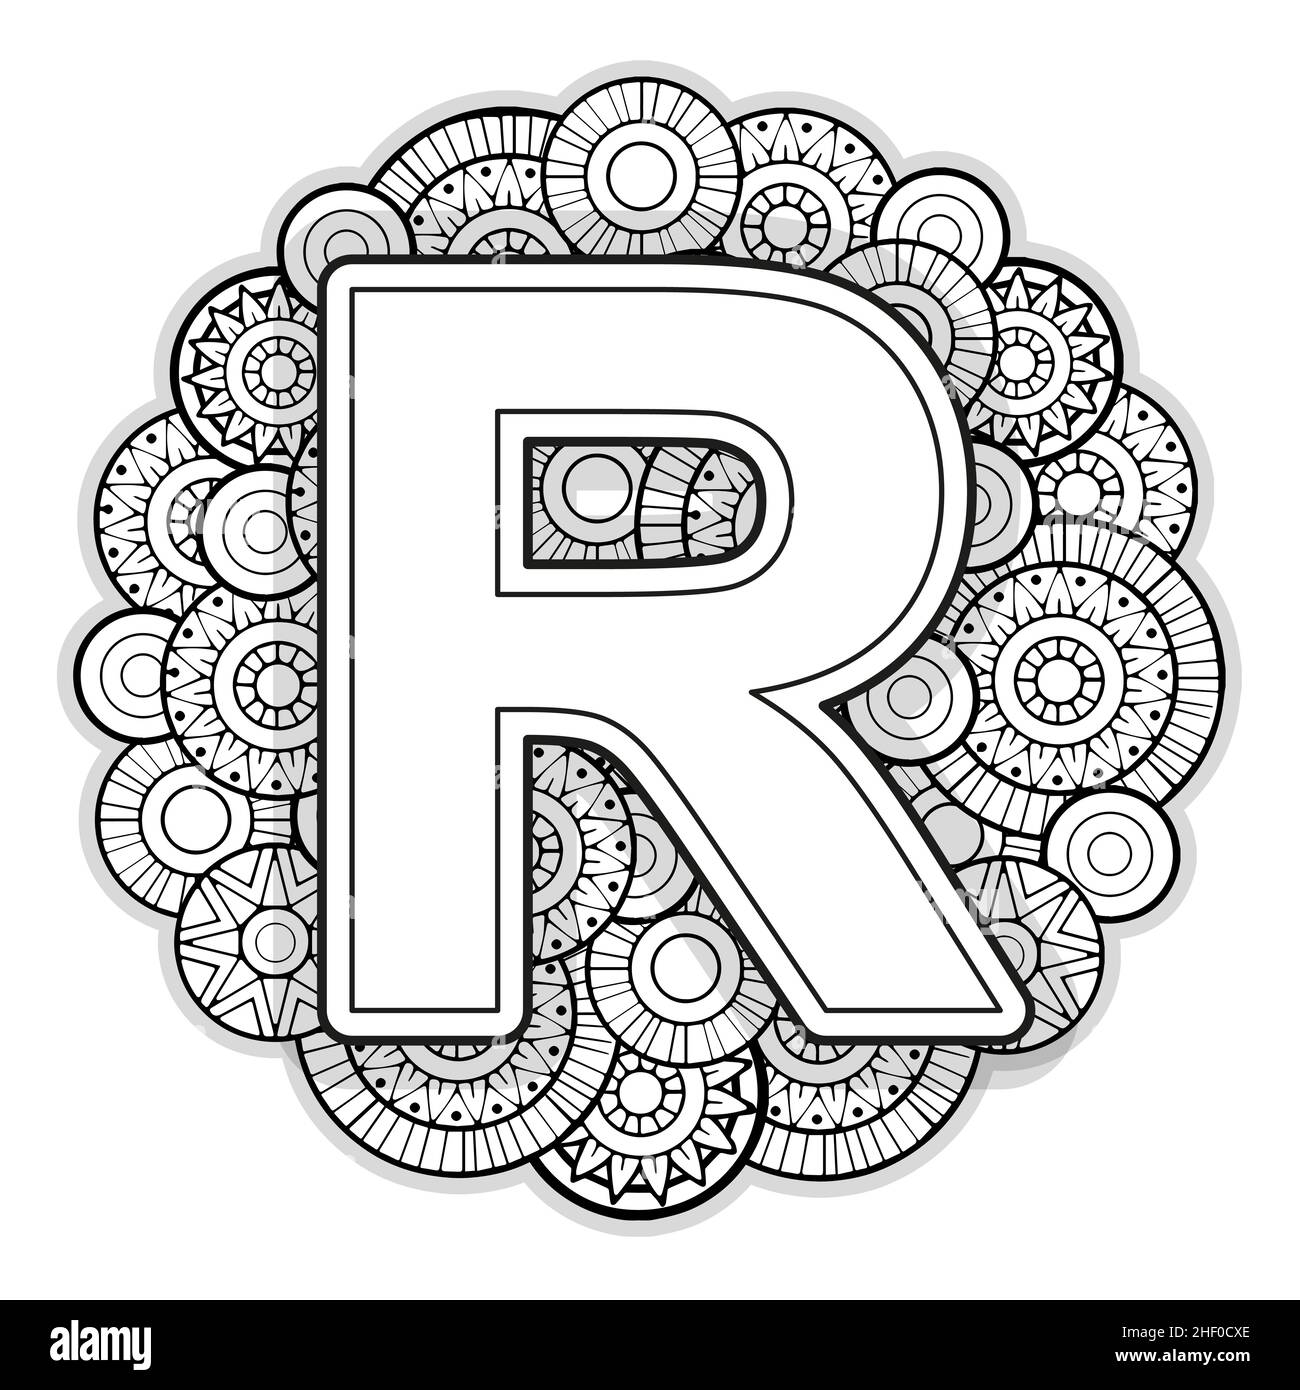 Vector coloring page for adults contour black and white capital english letter r on a mandala background stock vector image art